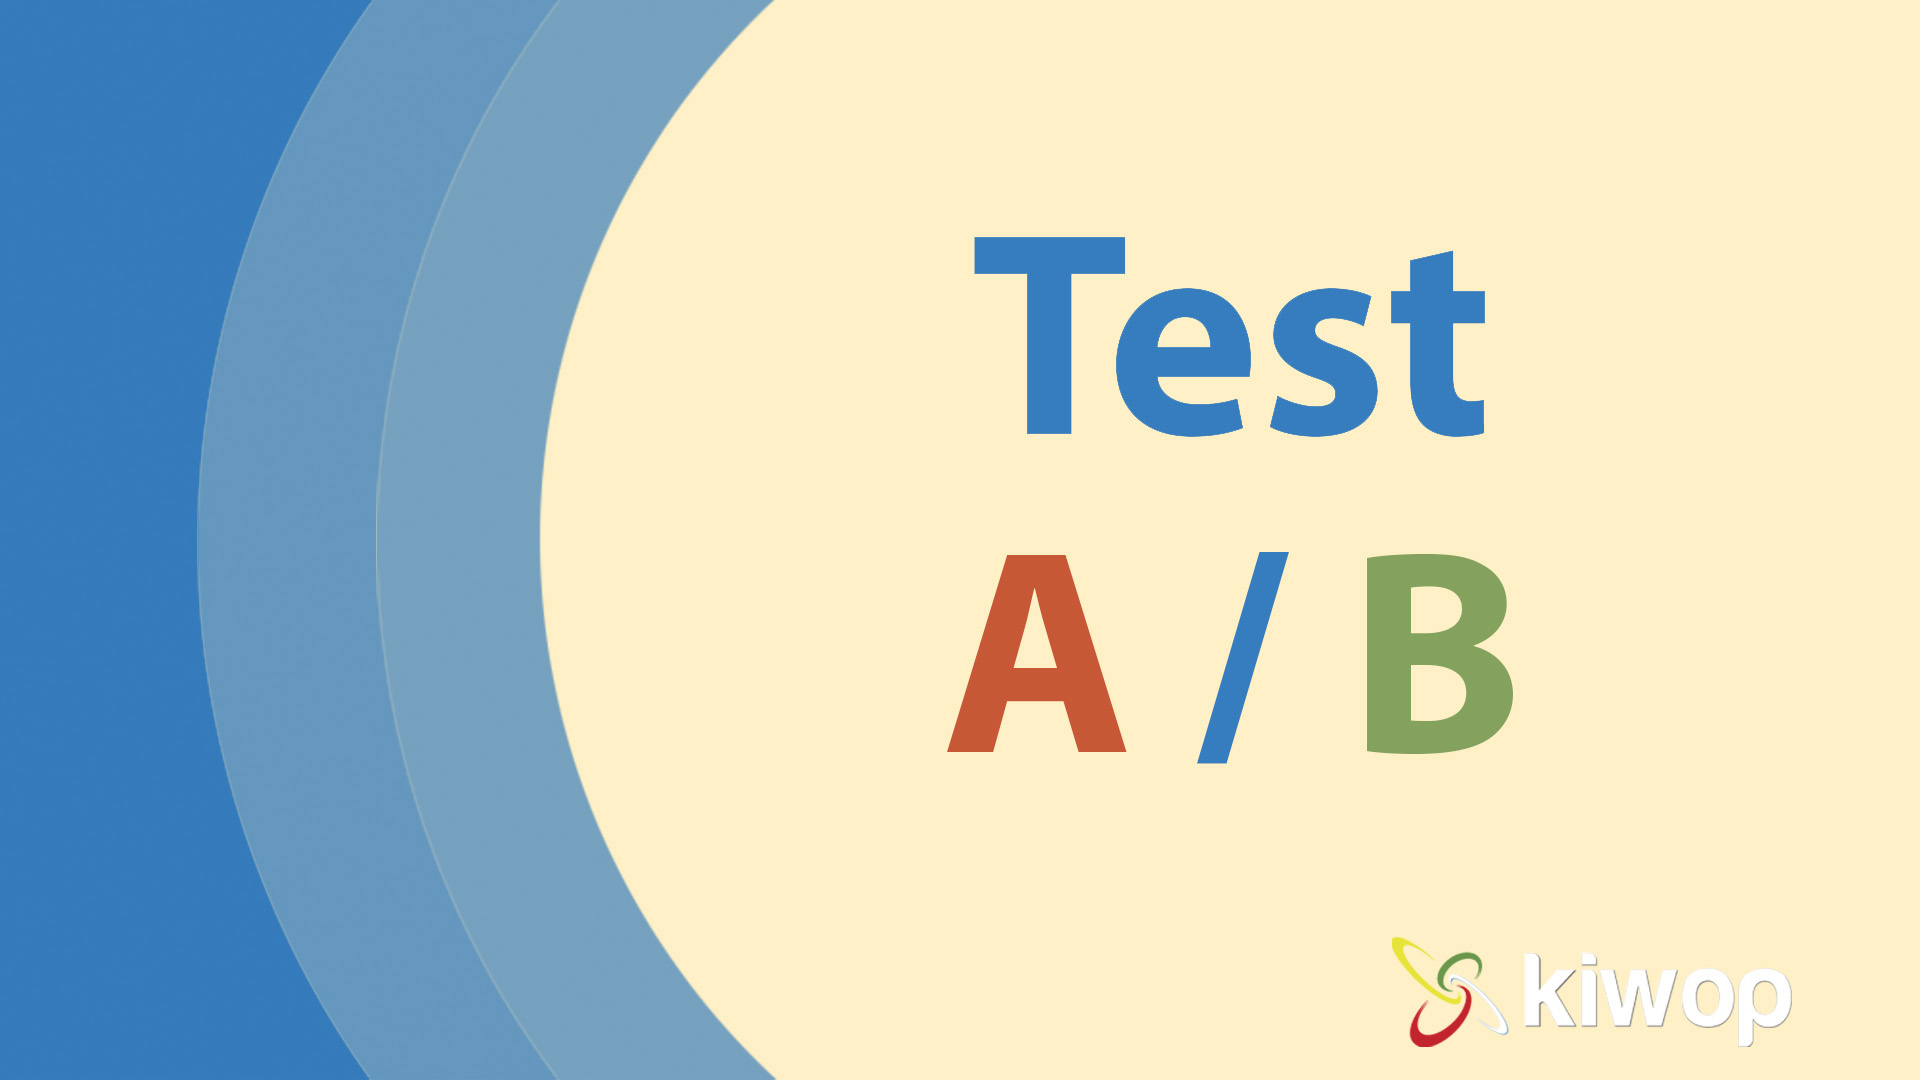 Here’s what you need to know about A/B Tests in Email Marketing